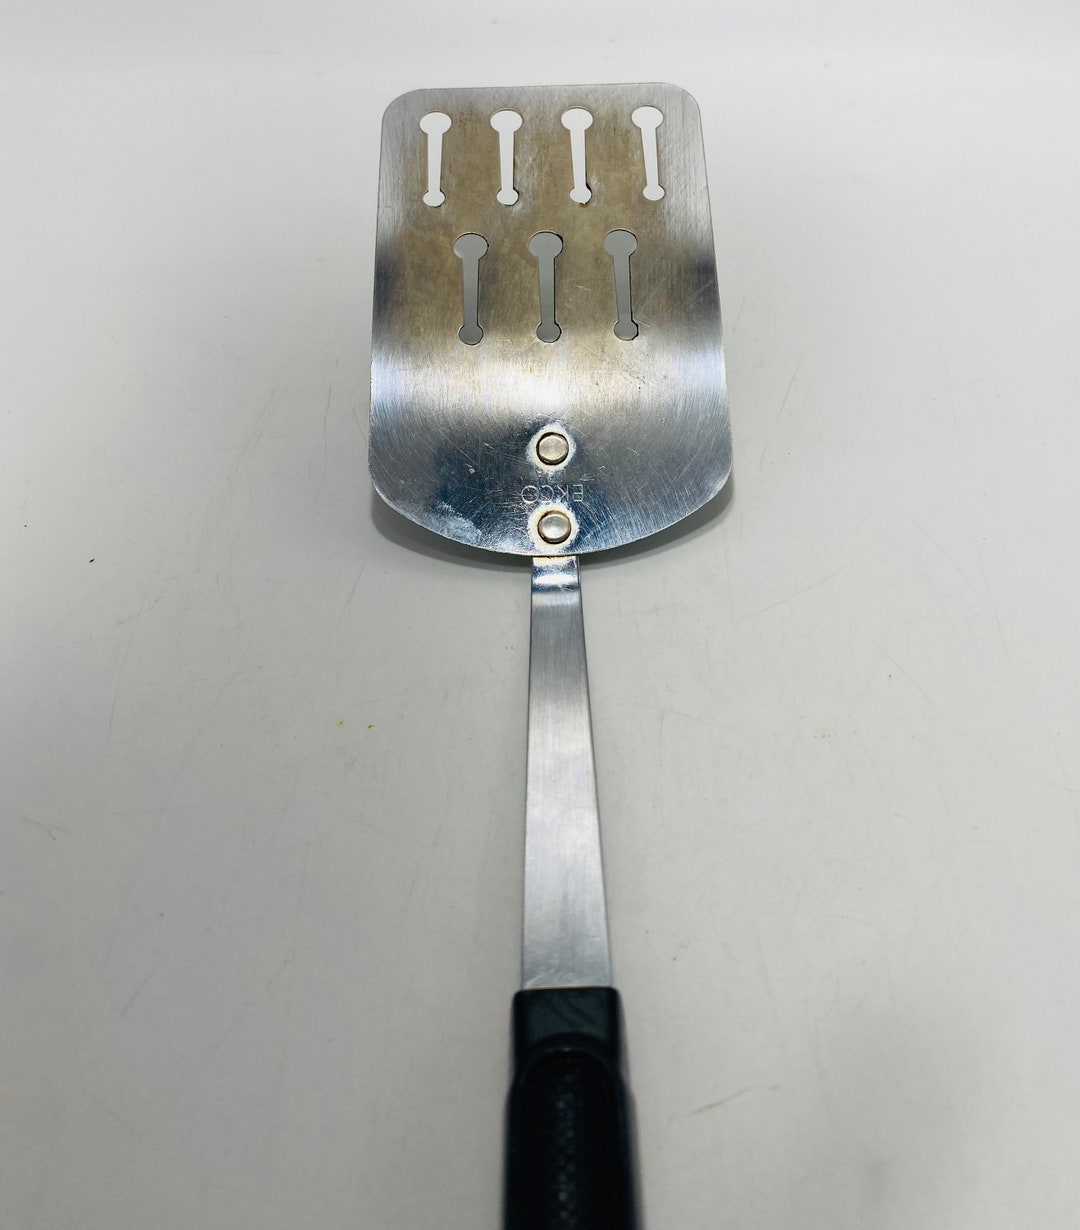 Vintage Chief Small Metal Slotted Spatula With Black plastic Handle Made In  USA